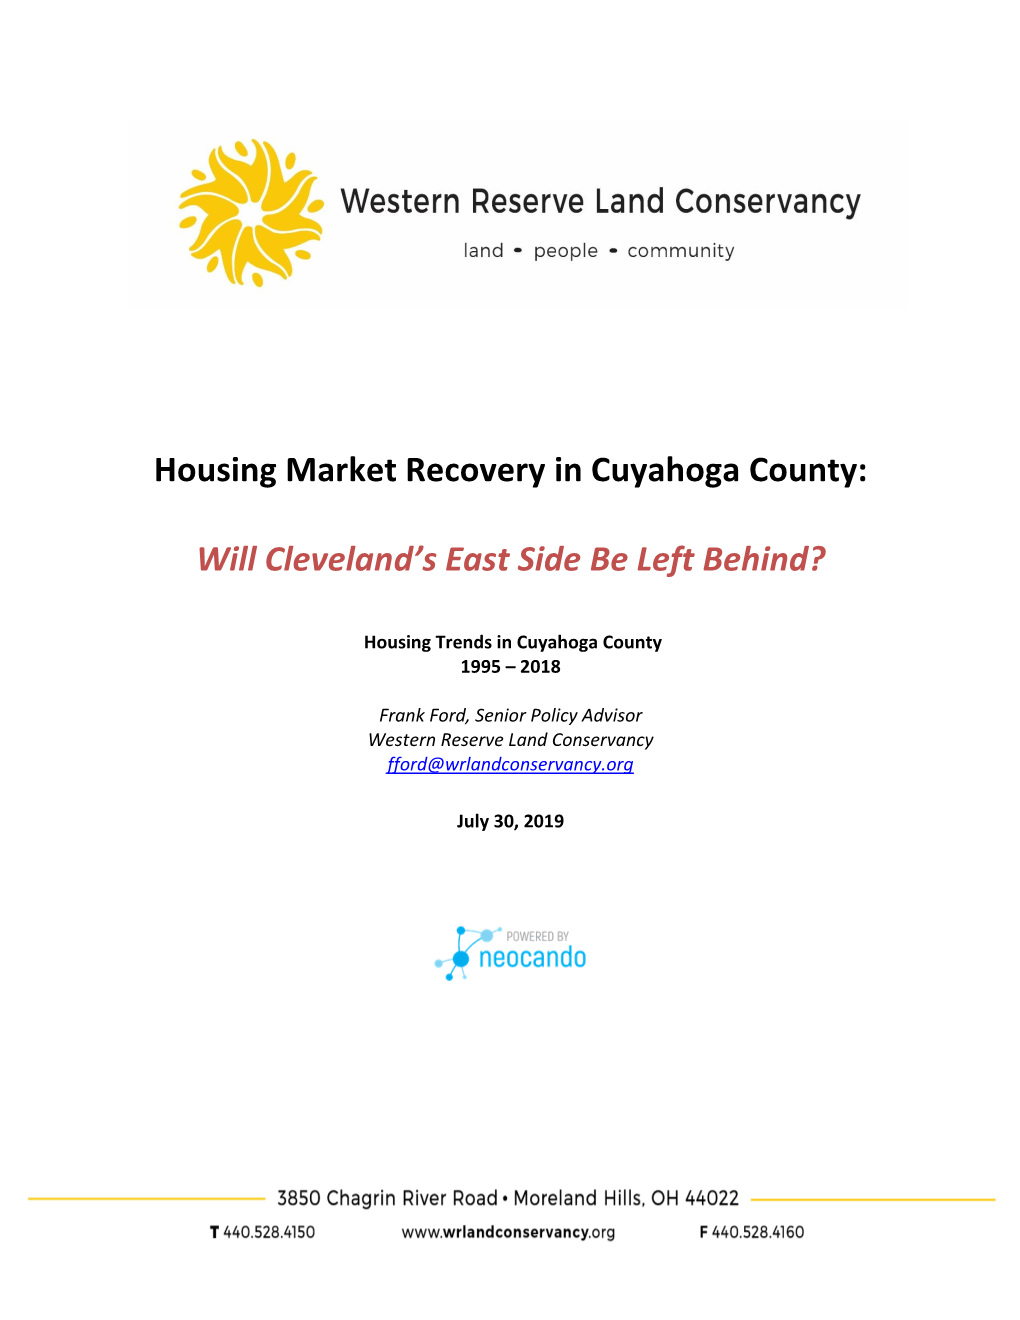 Housing Market Recovery in Cuyahoga County